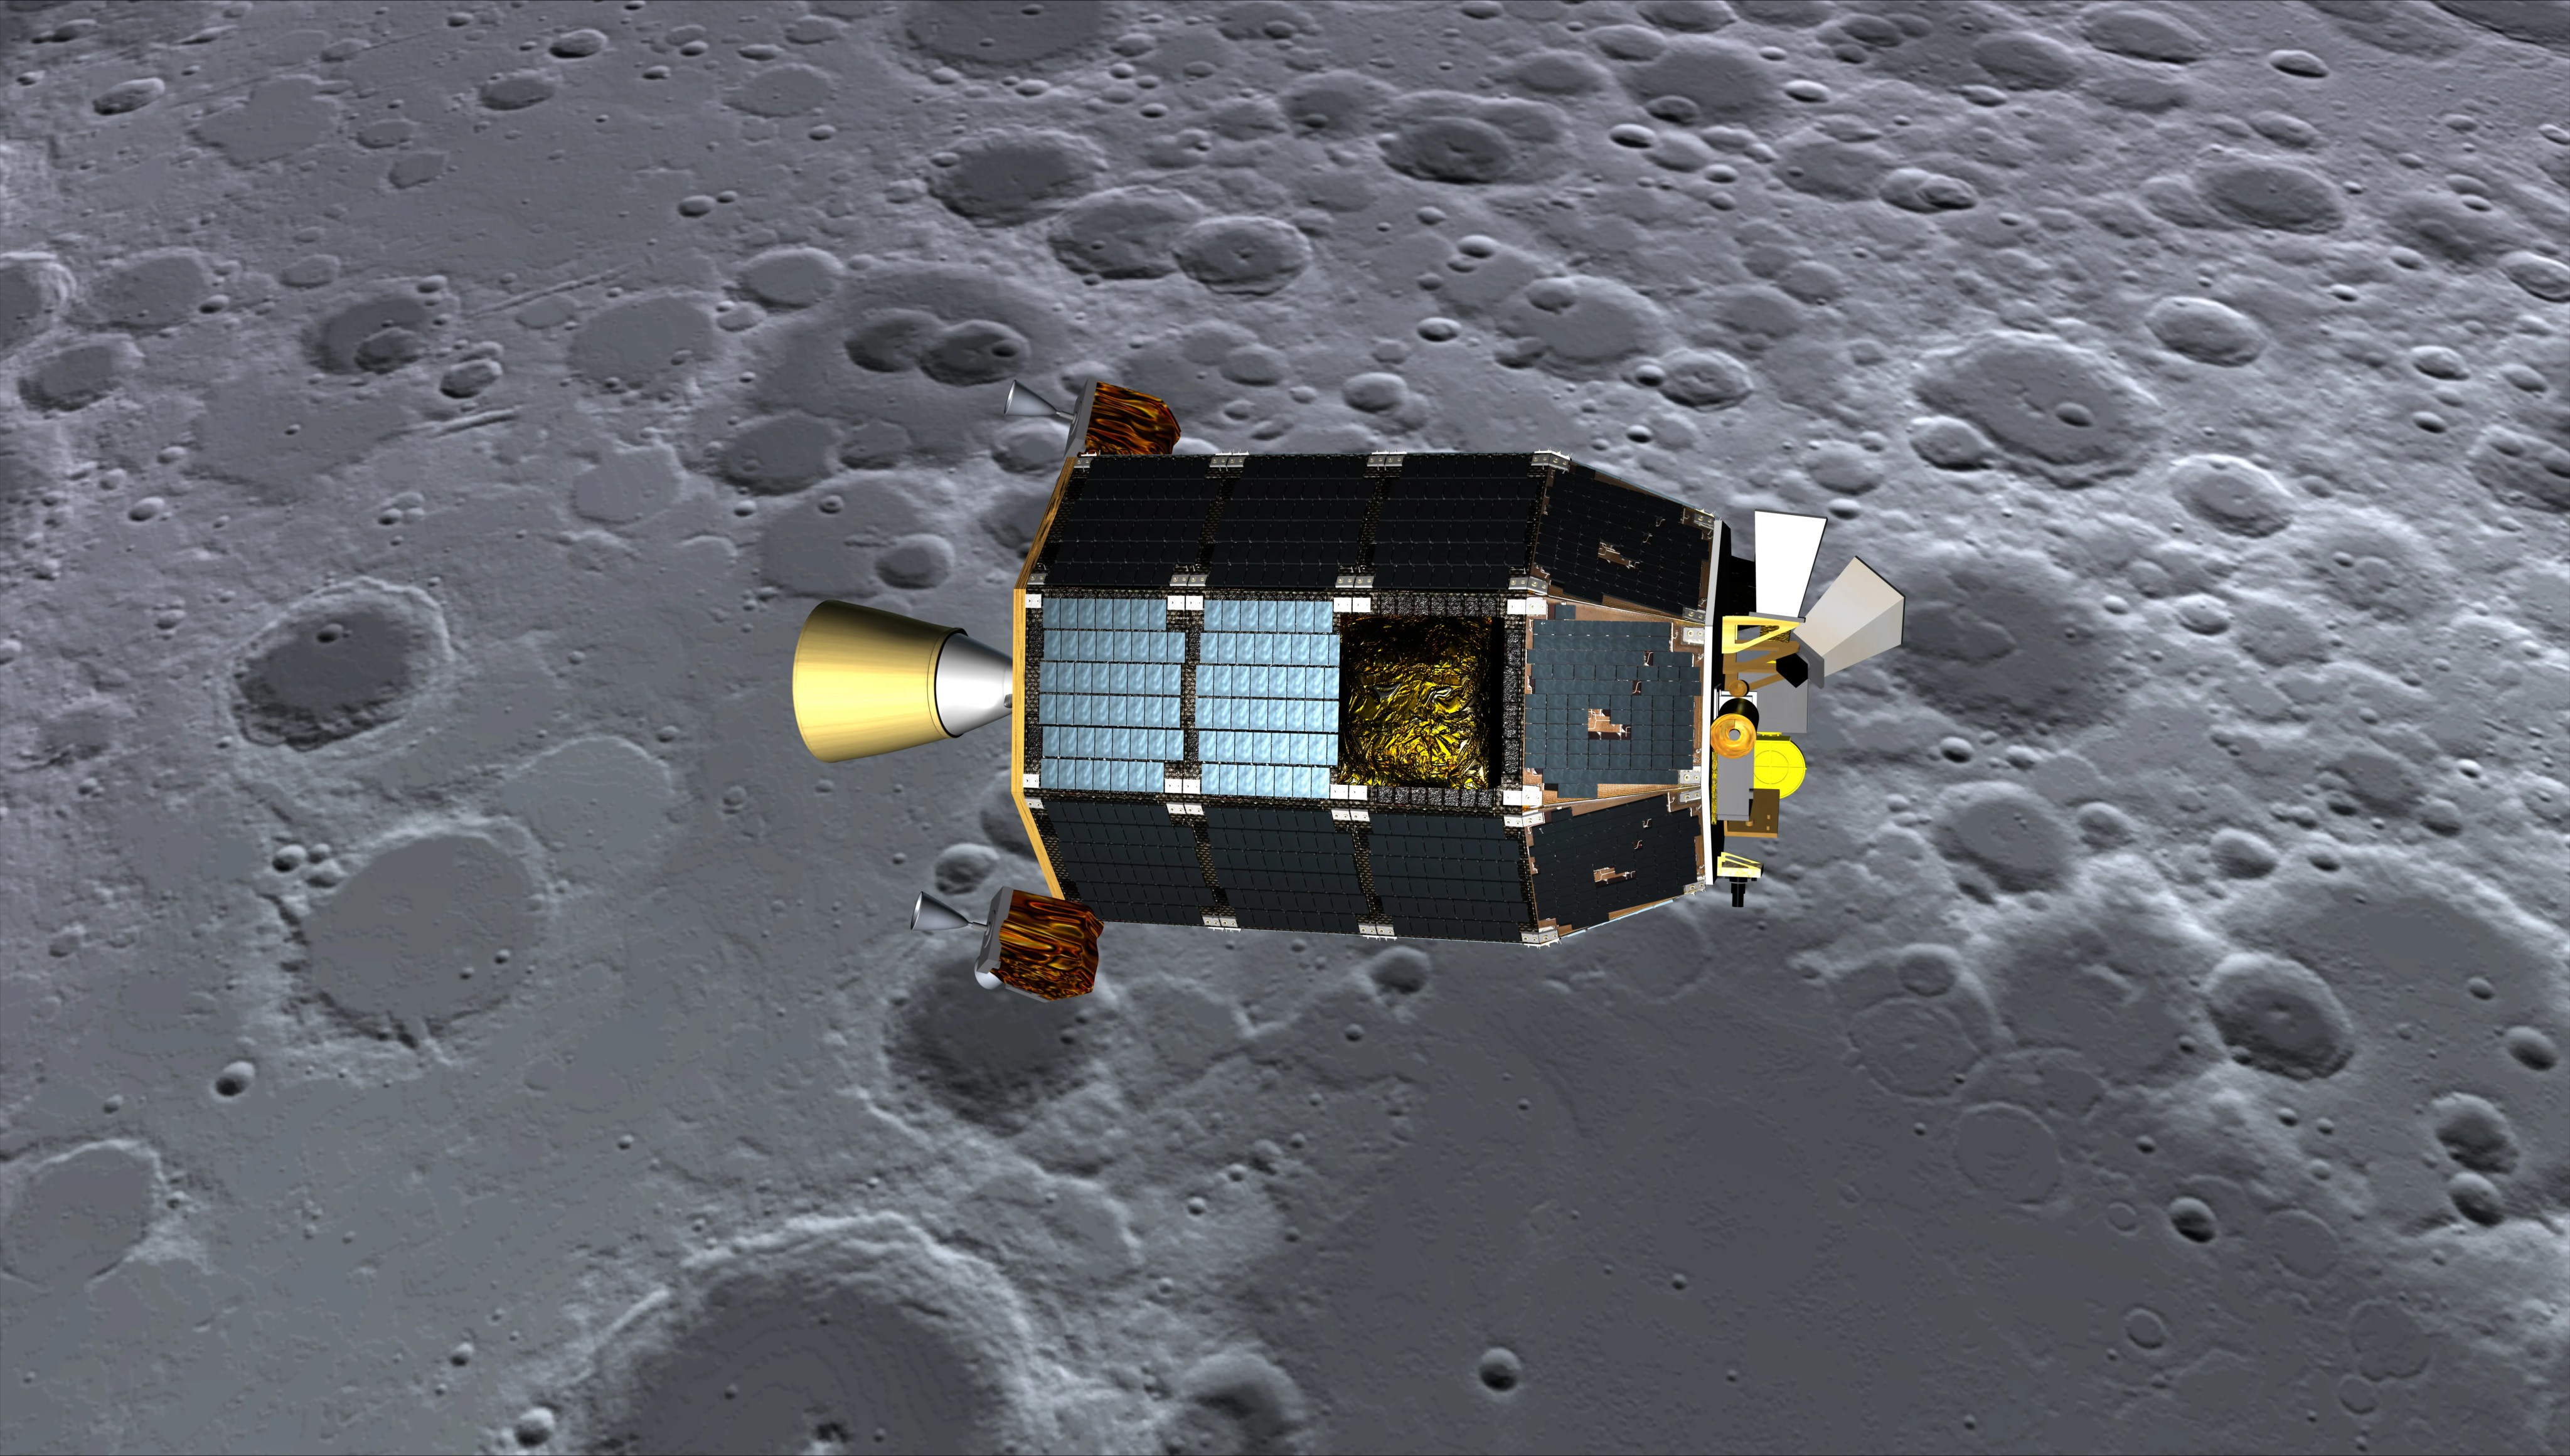 An artist's concept of LADEE spacecraft orbiting near the surface of the moon.